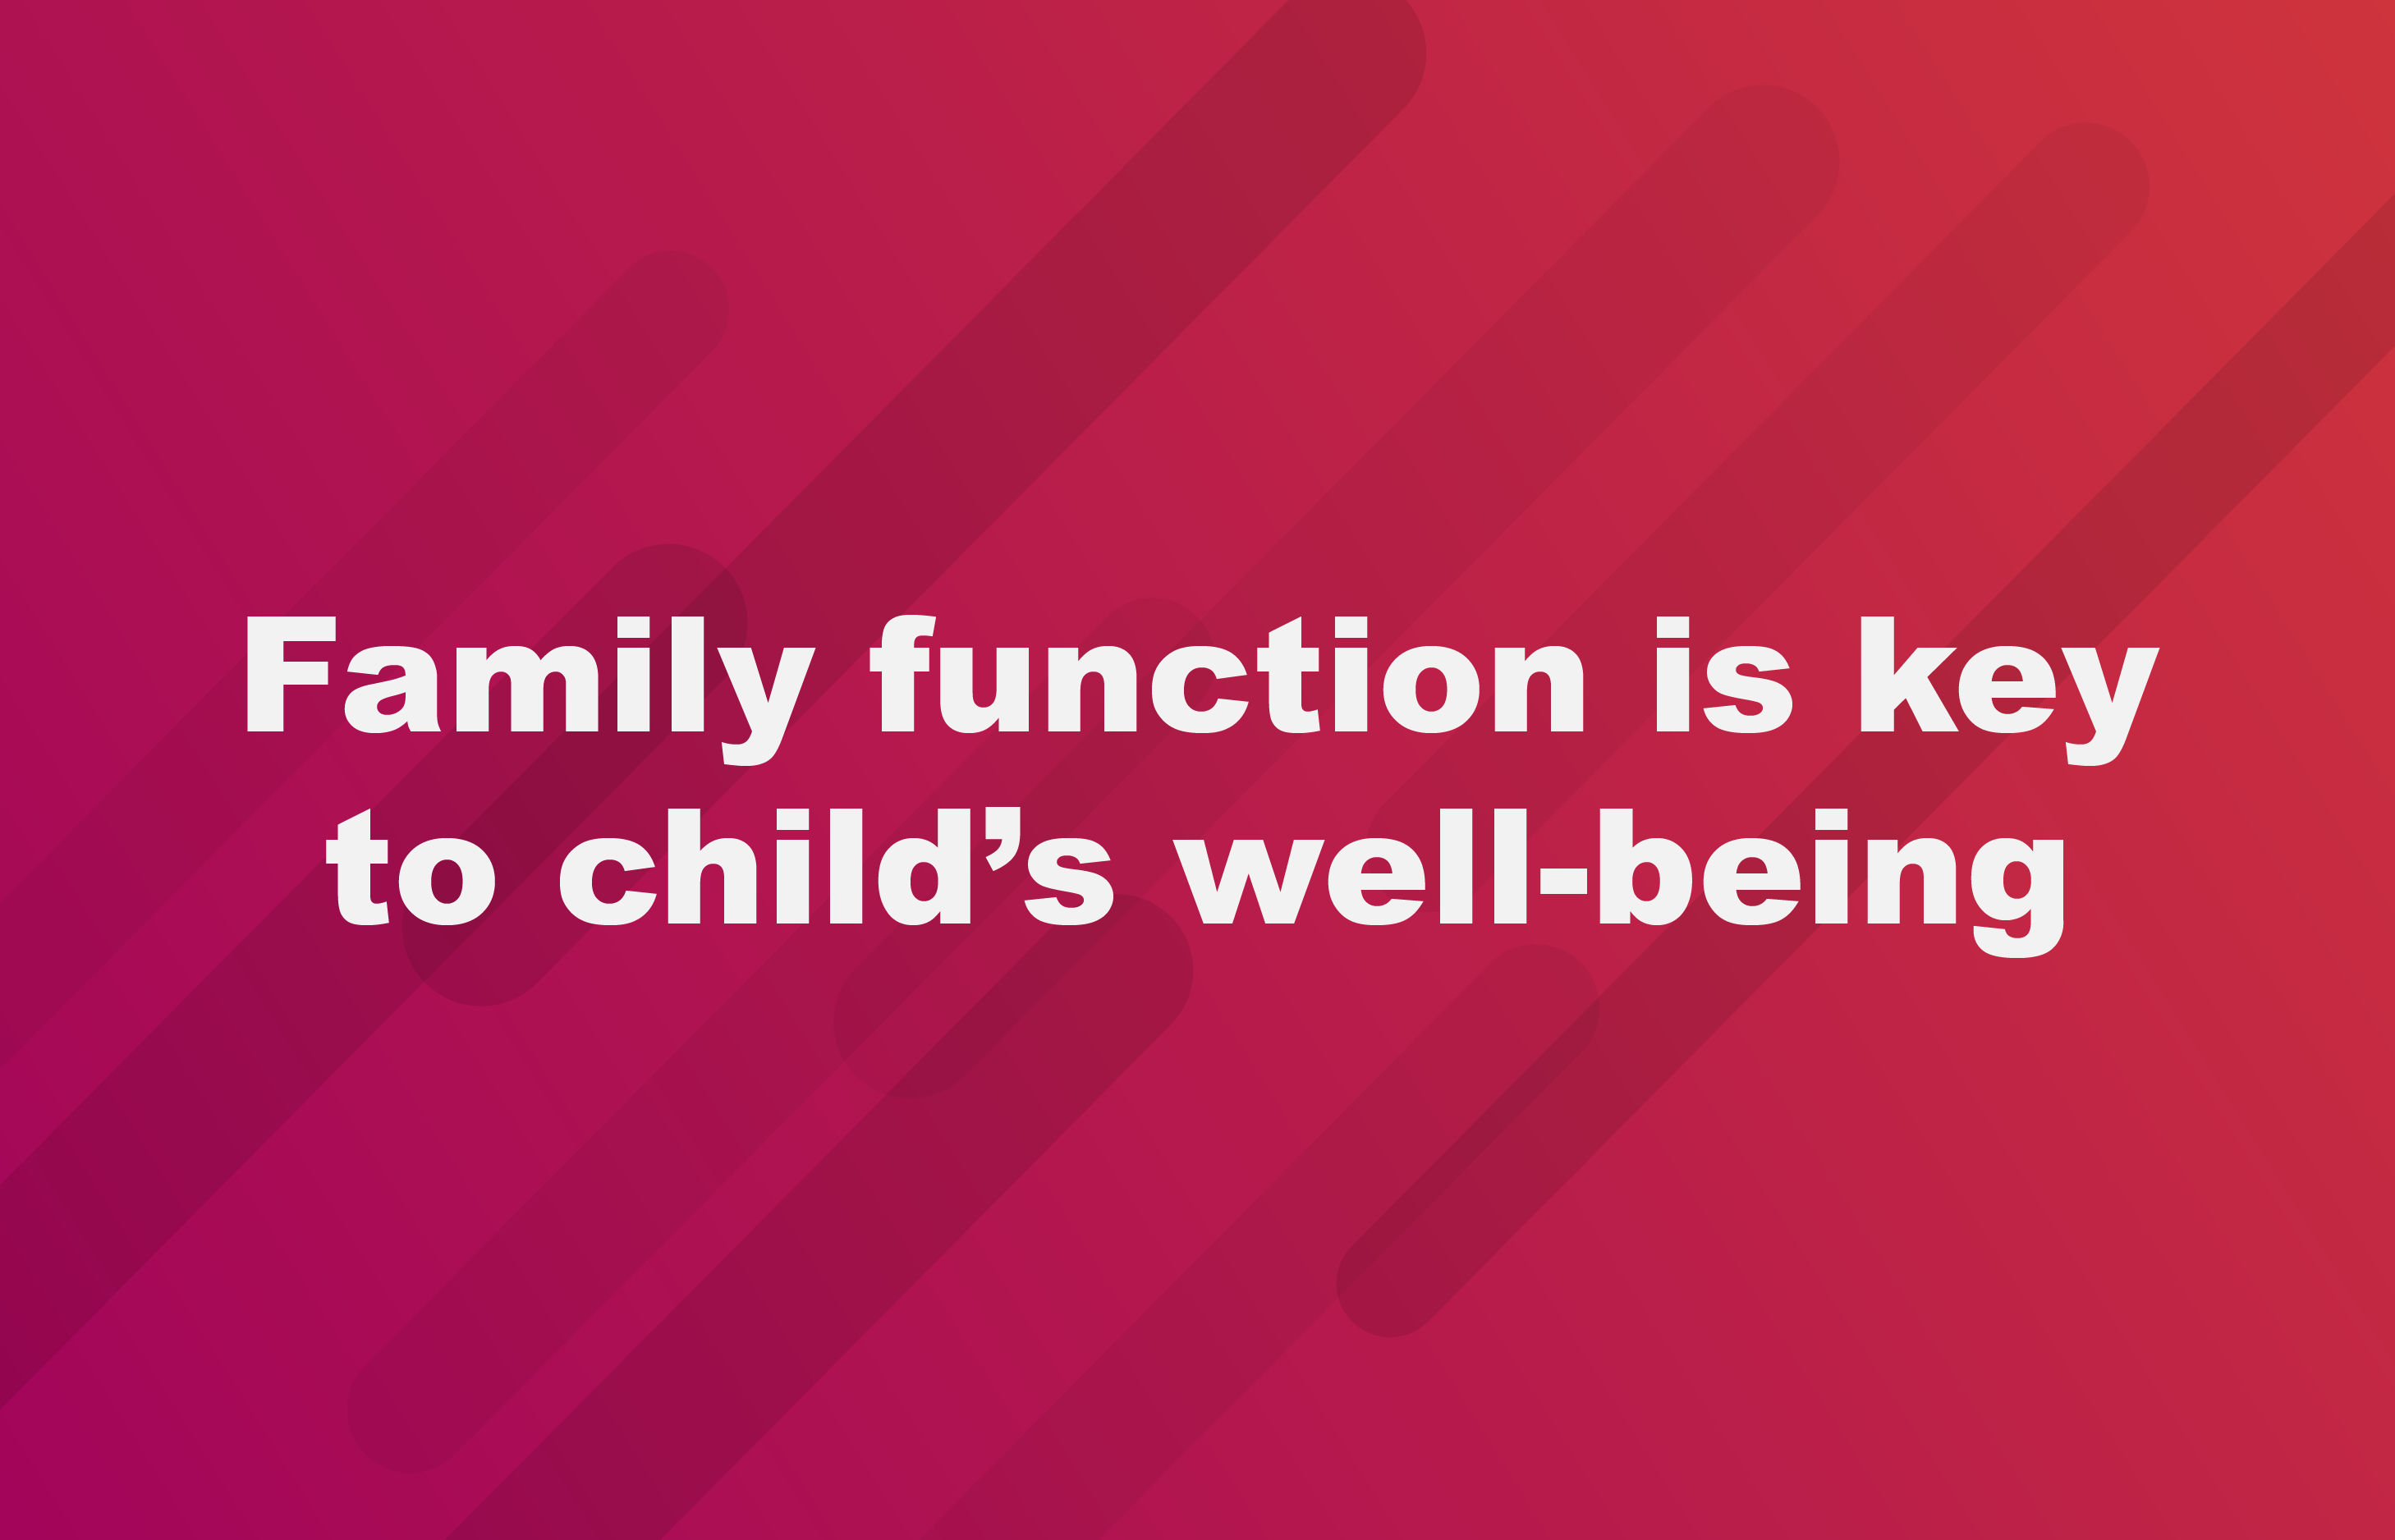 Family function is key to child’s well-being